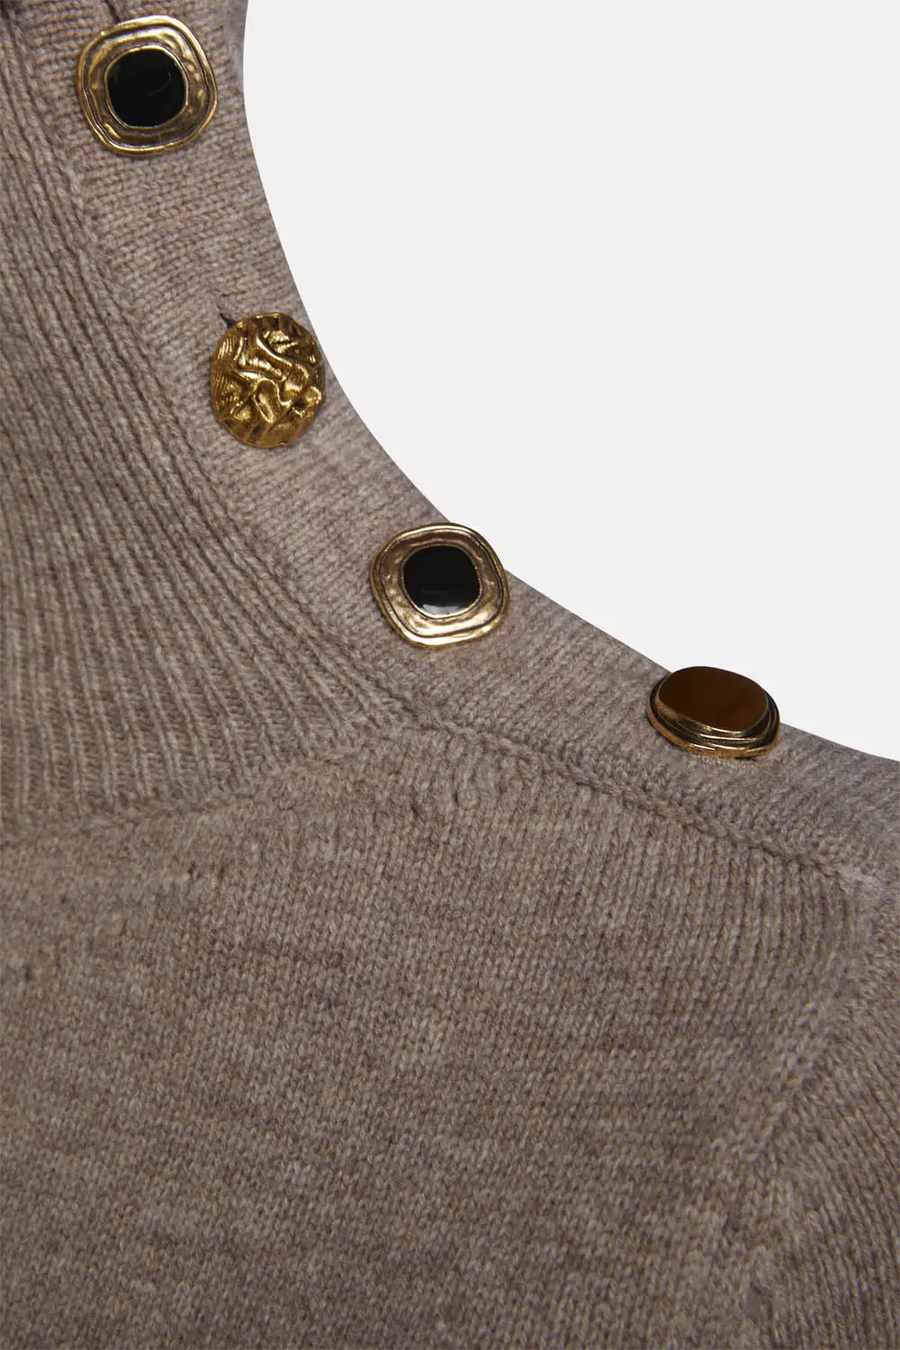 SKILLS & GENES - PURE WOOL TURTLENECK WITH JEWEL BUTTONS ON THE NECK INTENSE SAND